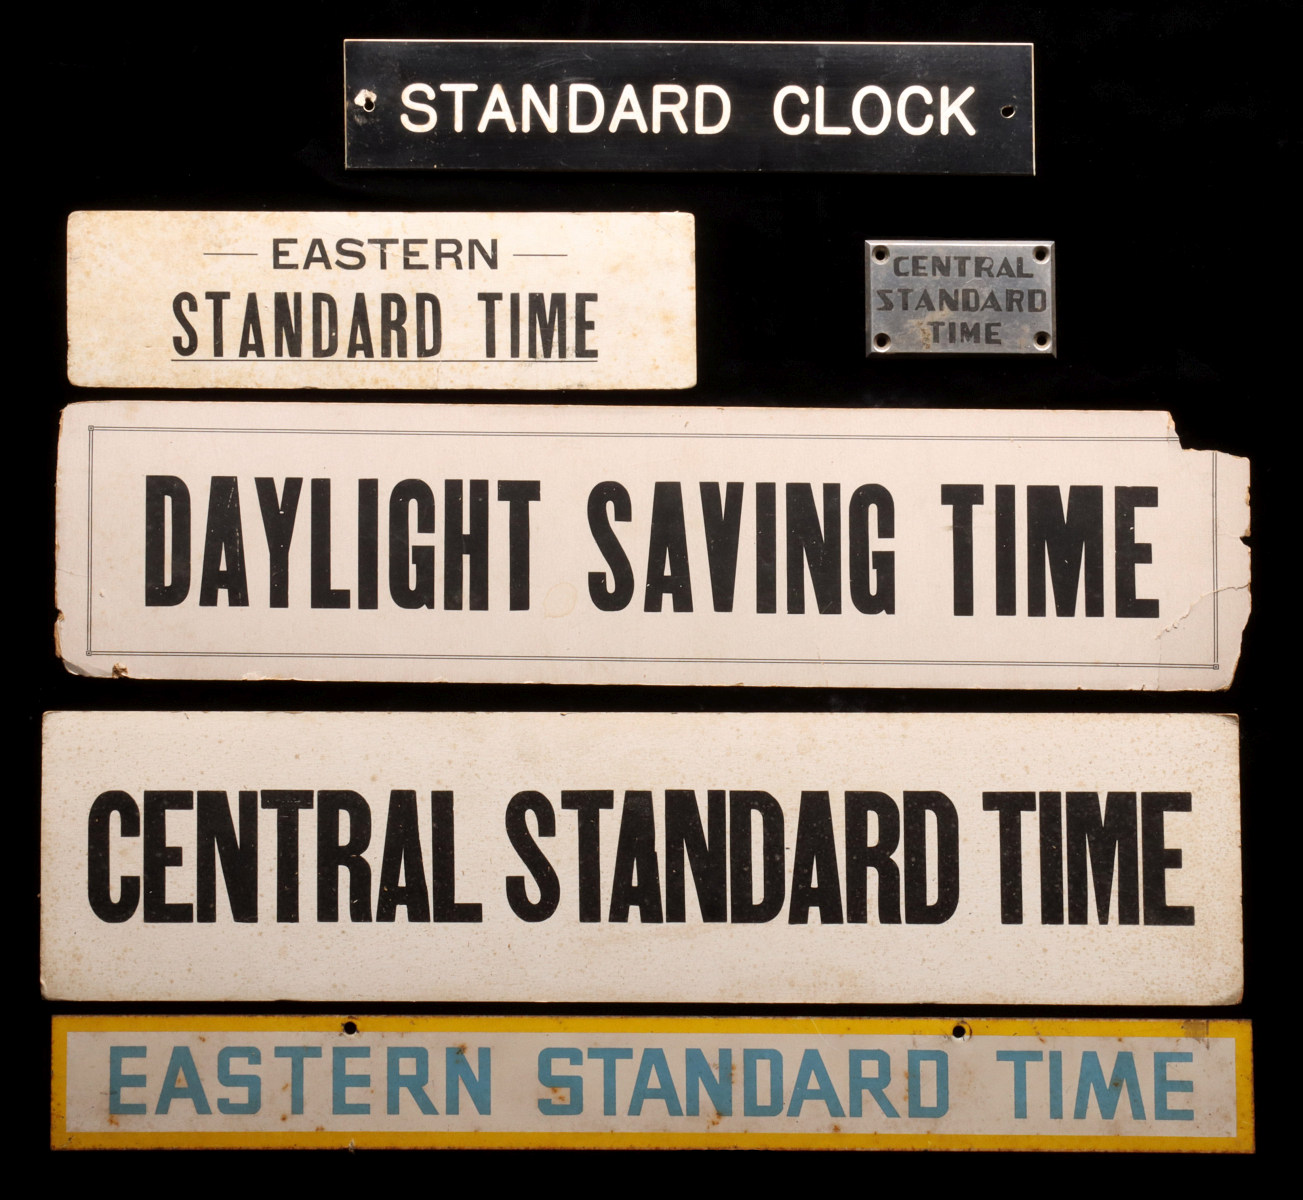 A COLLECTION OF RAILROAD STATION CLOCK PLACARDS